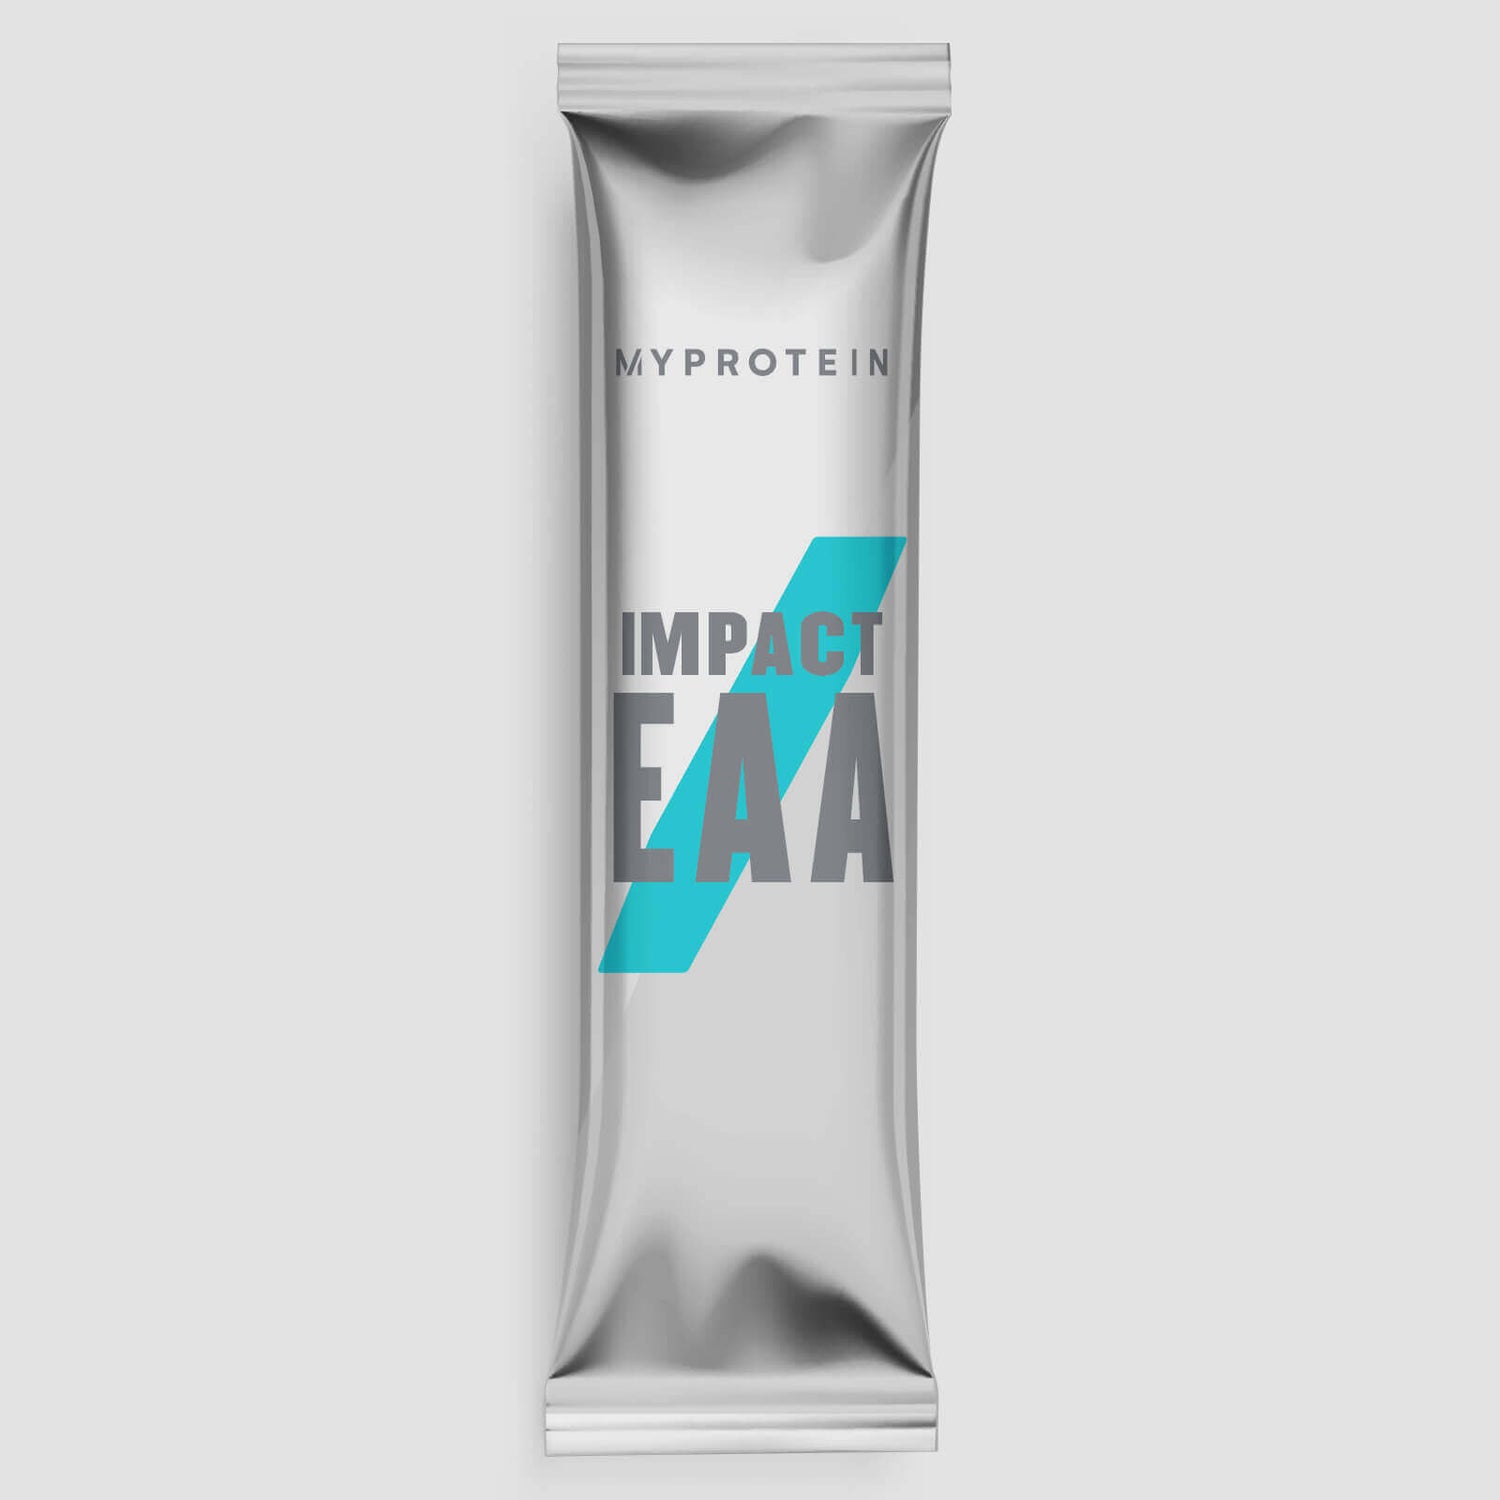 Myprotein Impact EAA Stick Pack (Sample) - 7g - Naturell